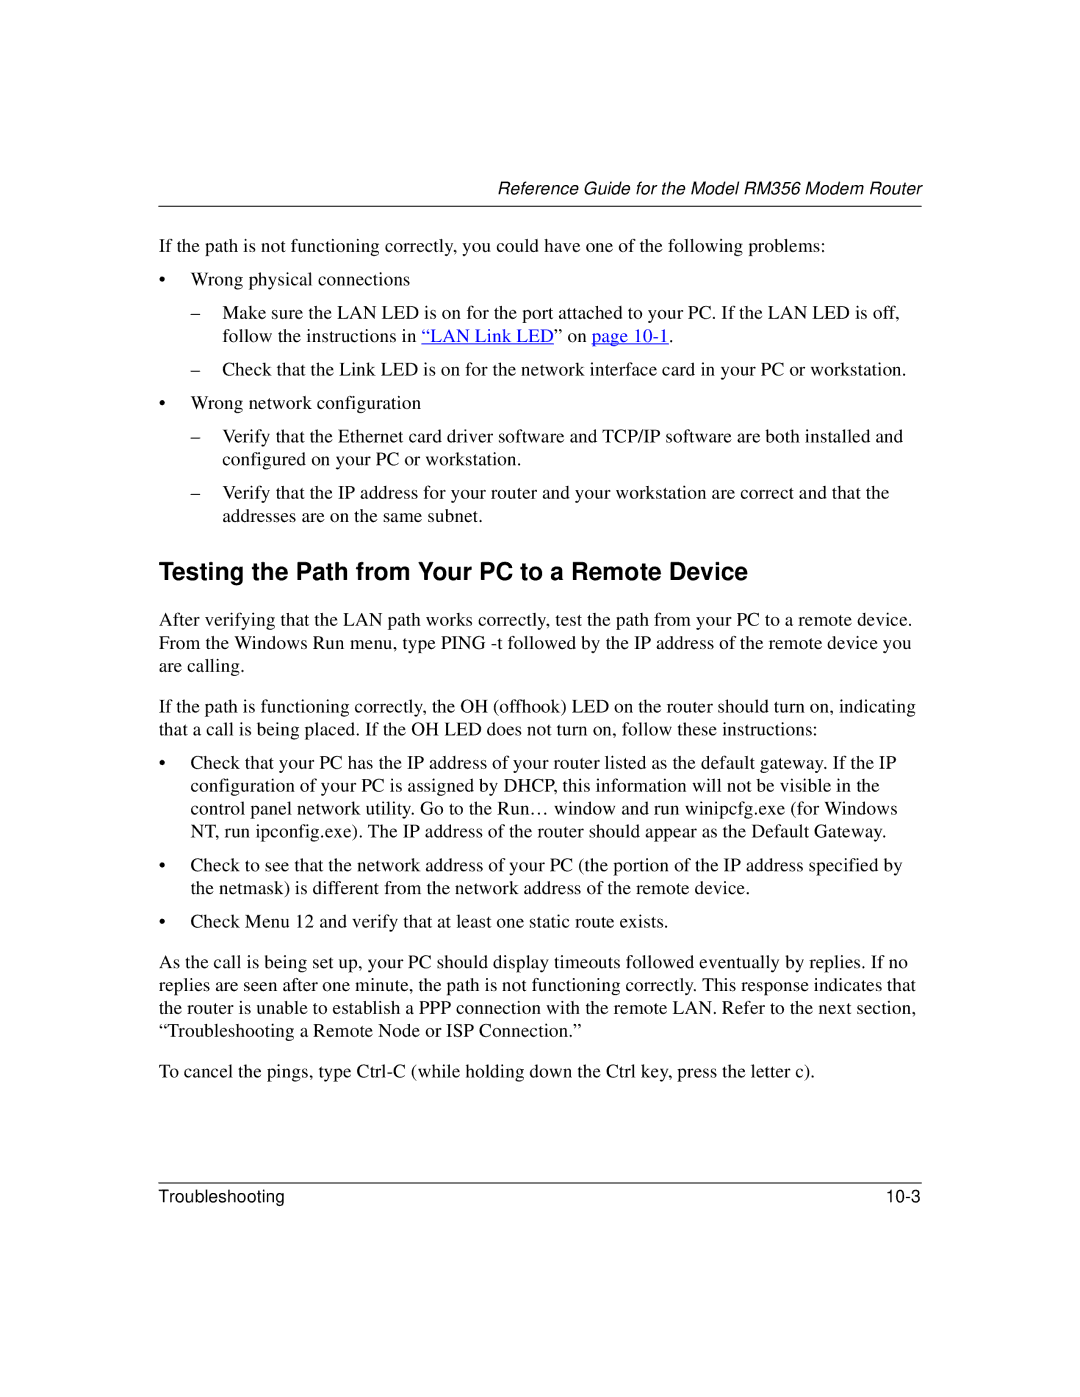 Bay Technical Associates RM356 manual Testing the Path from Your PC to a Remote Device 